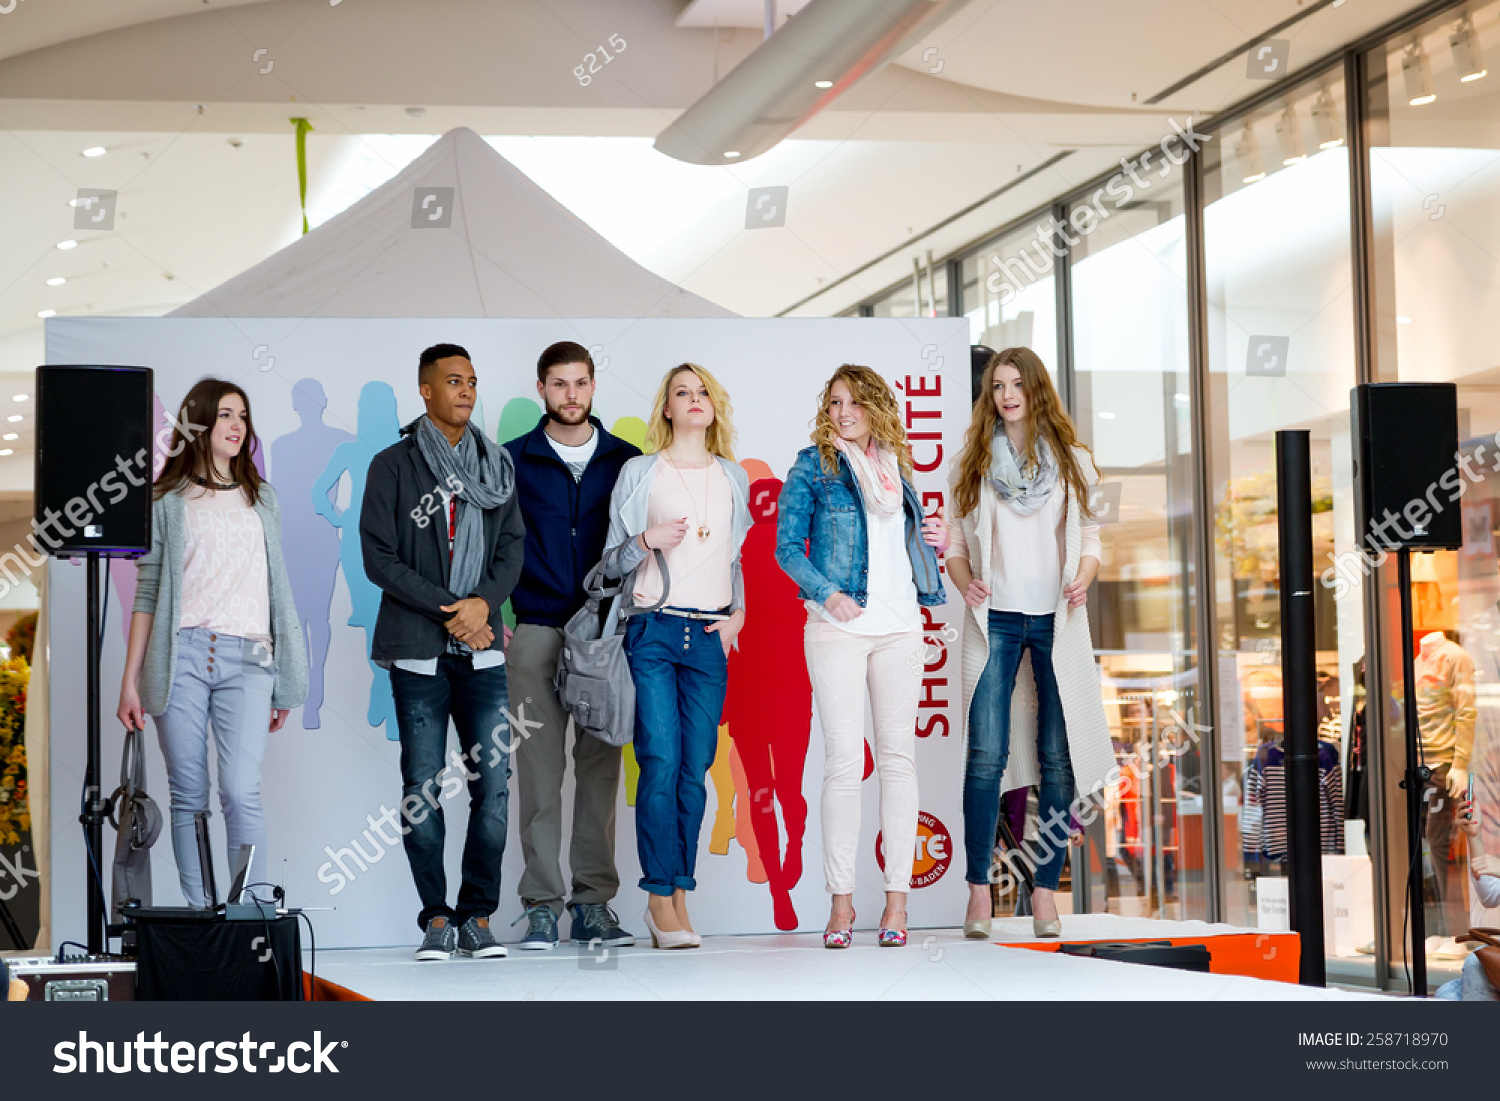 BADEN-BADEN, GERMANY - MARCH 7: Fashion model wearing clothes from the spring collection in a shopping center   on March 7, 2015 in Baden-Baden. Germany. Europe. #258718970